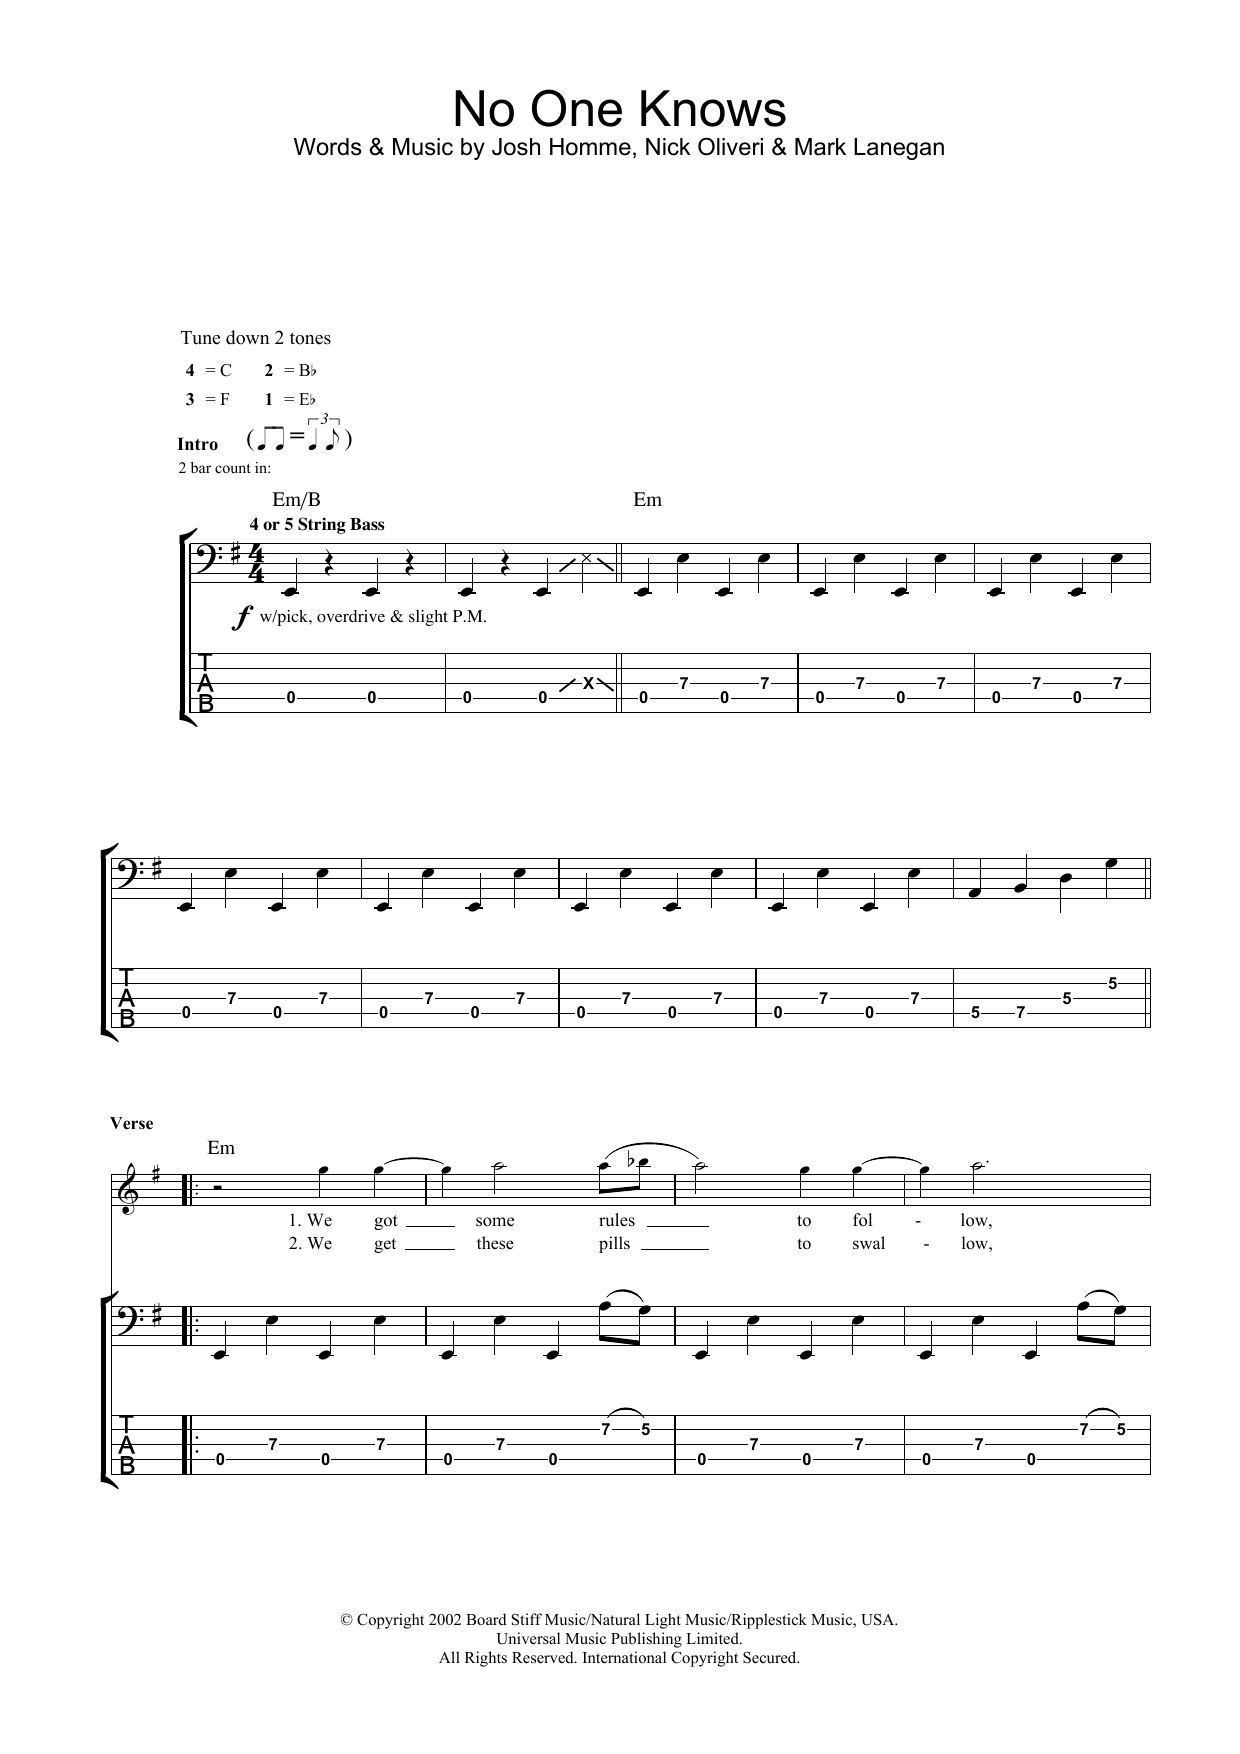 Download Queens Of The Stone Age No One Knows Sheet Music